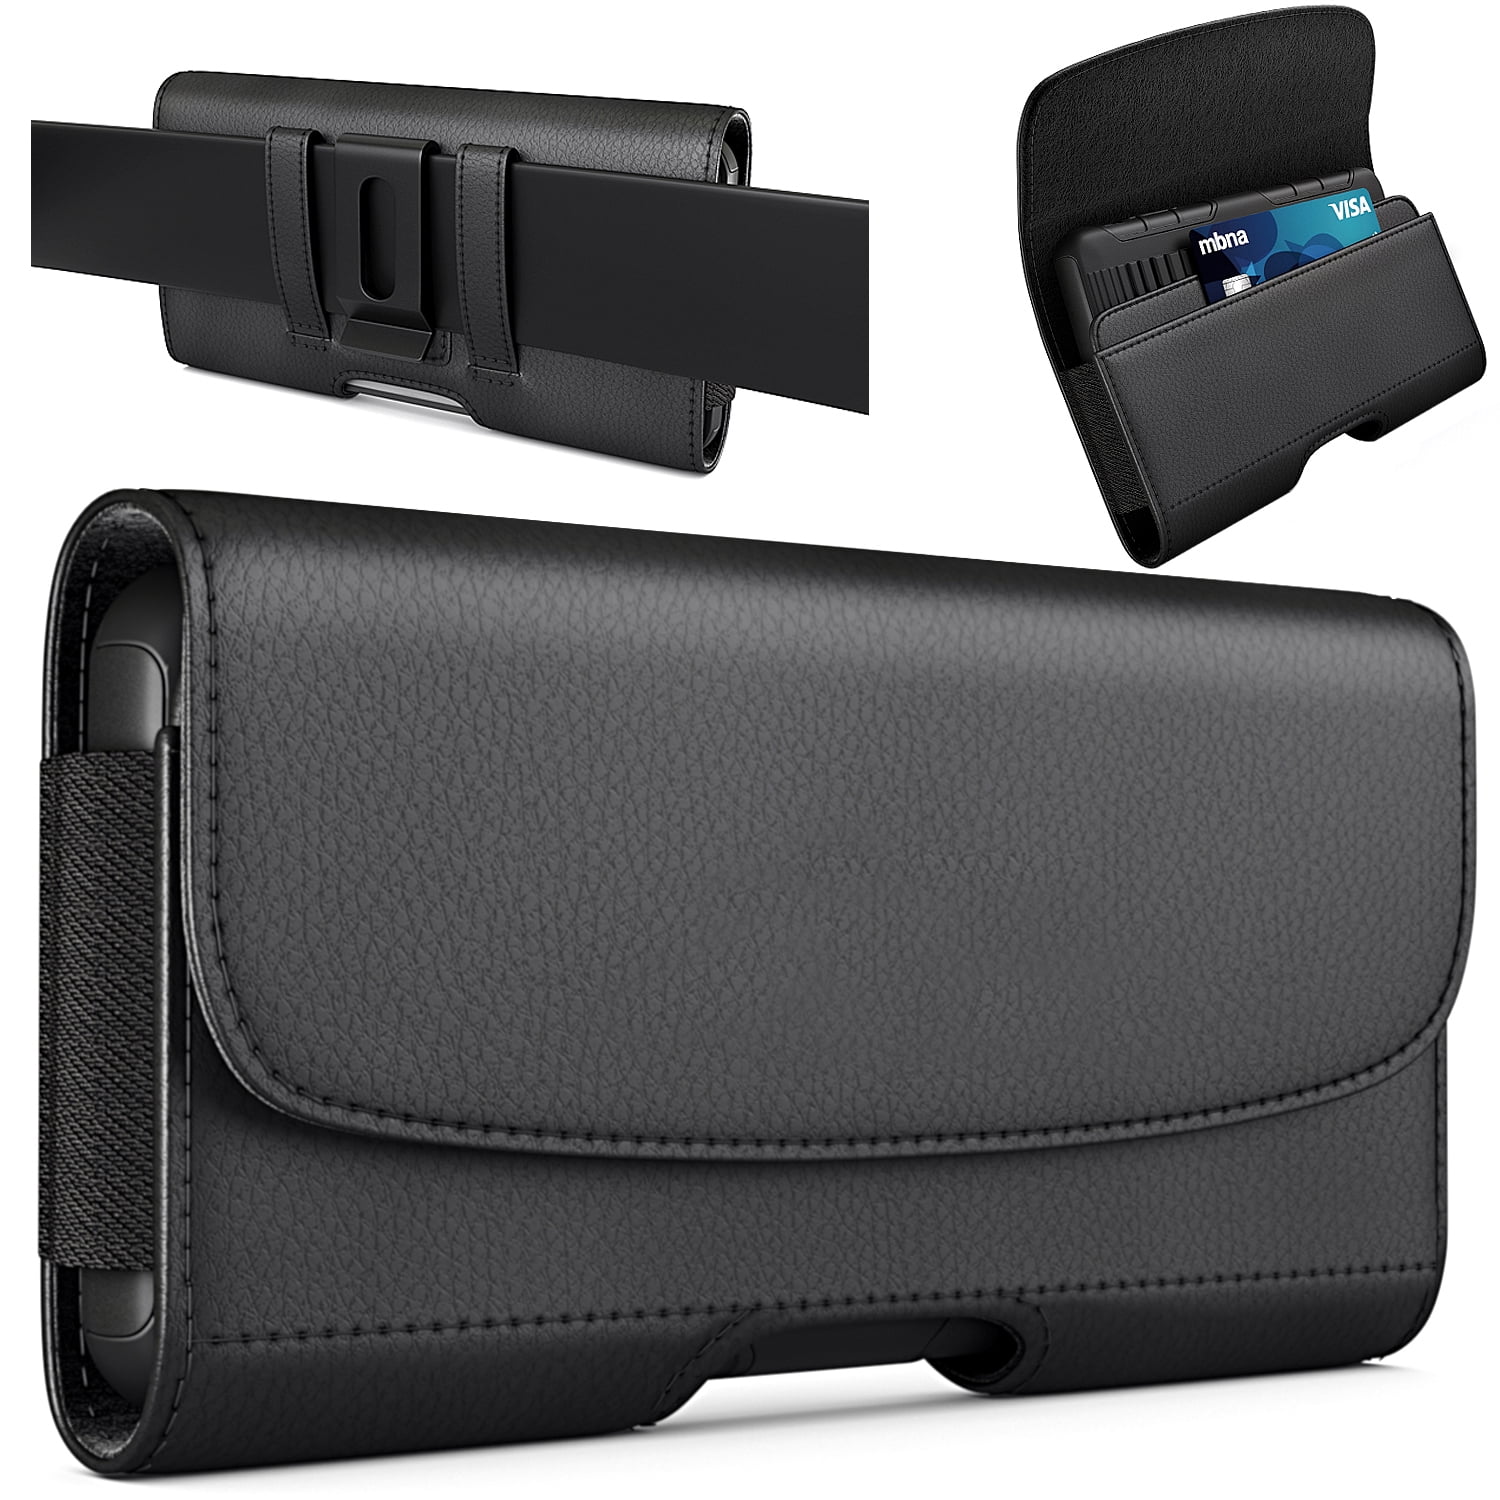 9 8 A7 A8 J4 A6 PU Leather Horizontal Cellphone Belt Loop Holster Case Compatible for Samsung Galaxy Note 10 A9 S10 J8 S8+ S10 5G A20 A30 A50 M30 J6 S9